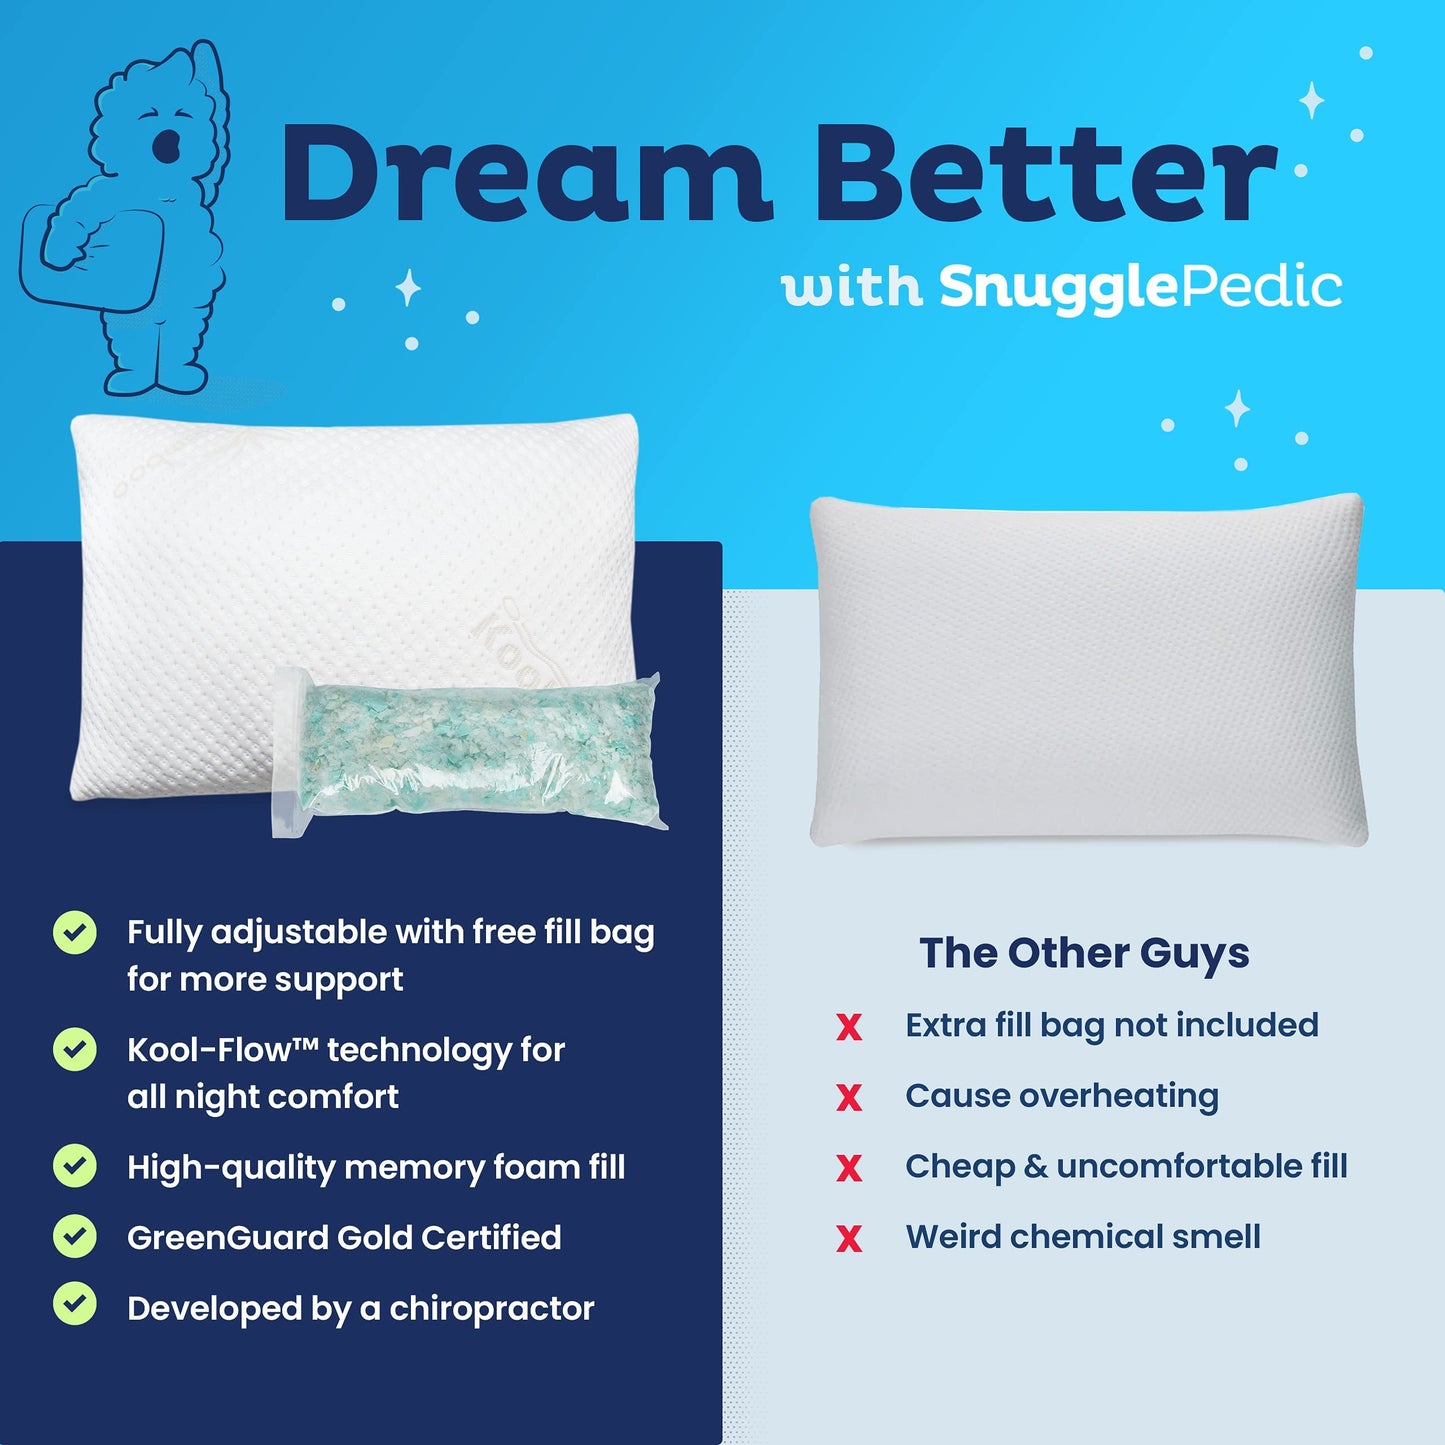 Snuggle-Pedic Gel Memory Foam Cooling Pillow Shredded Memory Foam Pillows for Side, Stomach & Back Sleepers - Keeps Shape - College Dorm Room Essentials for Girls and Guys - Queen